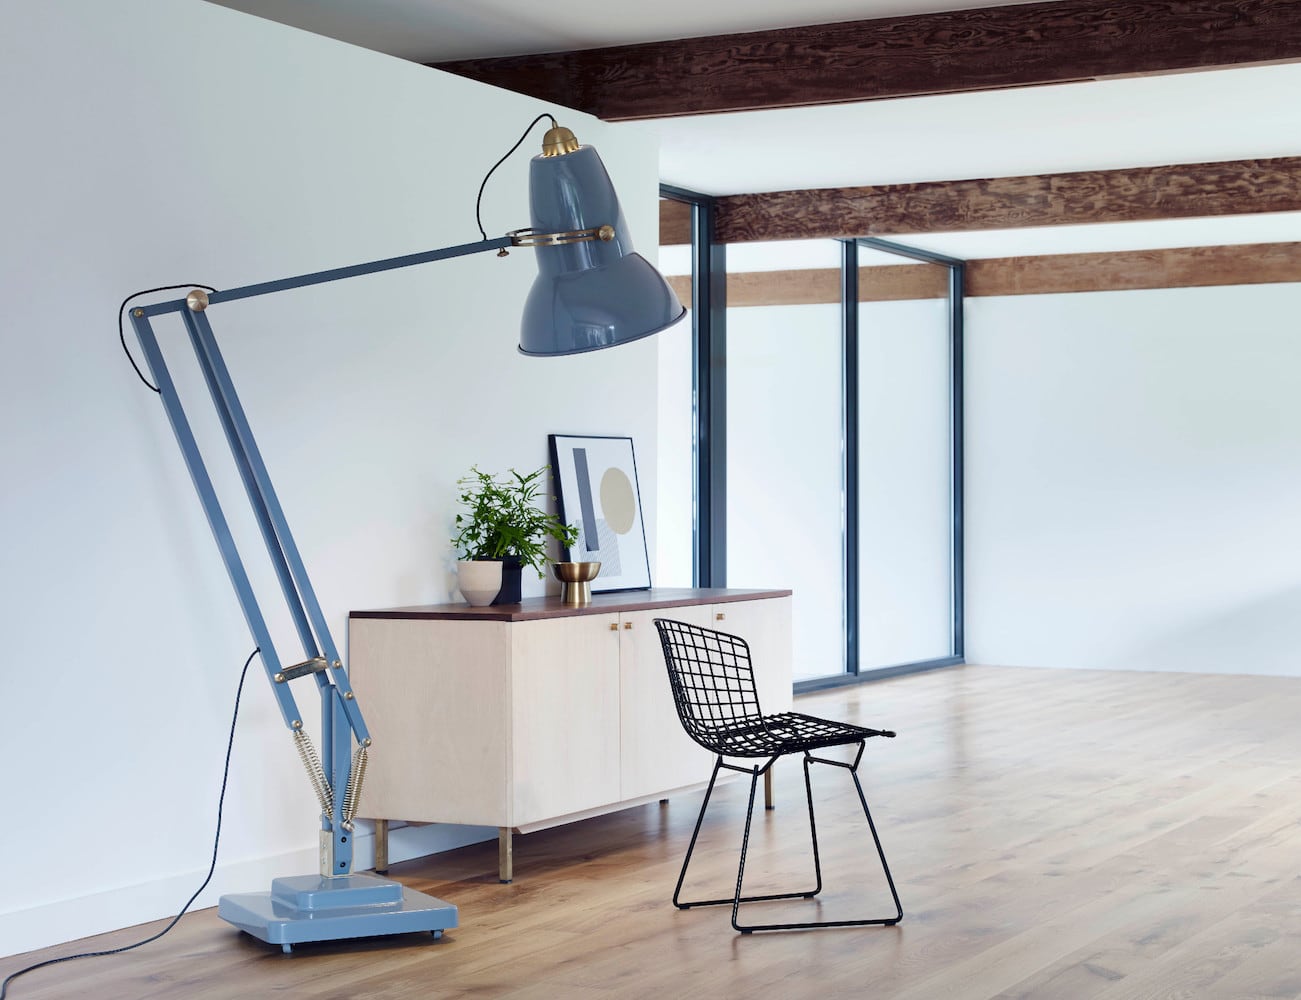 Original 1227 Giant Floor Lamp gives your home some whimsy